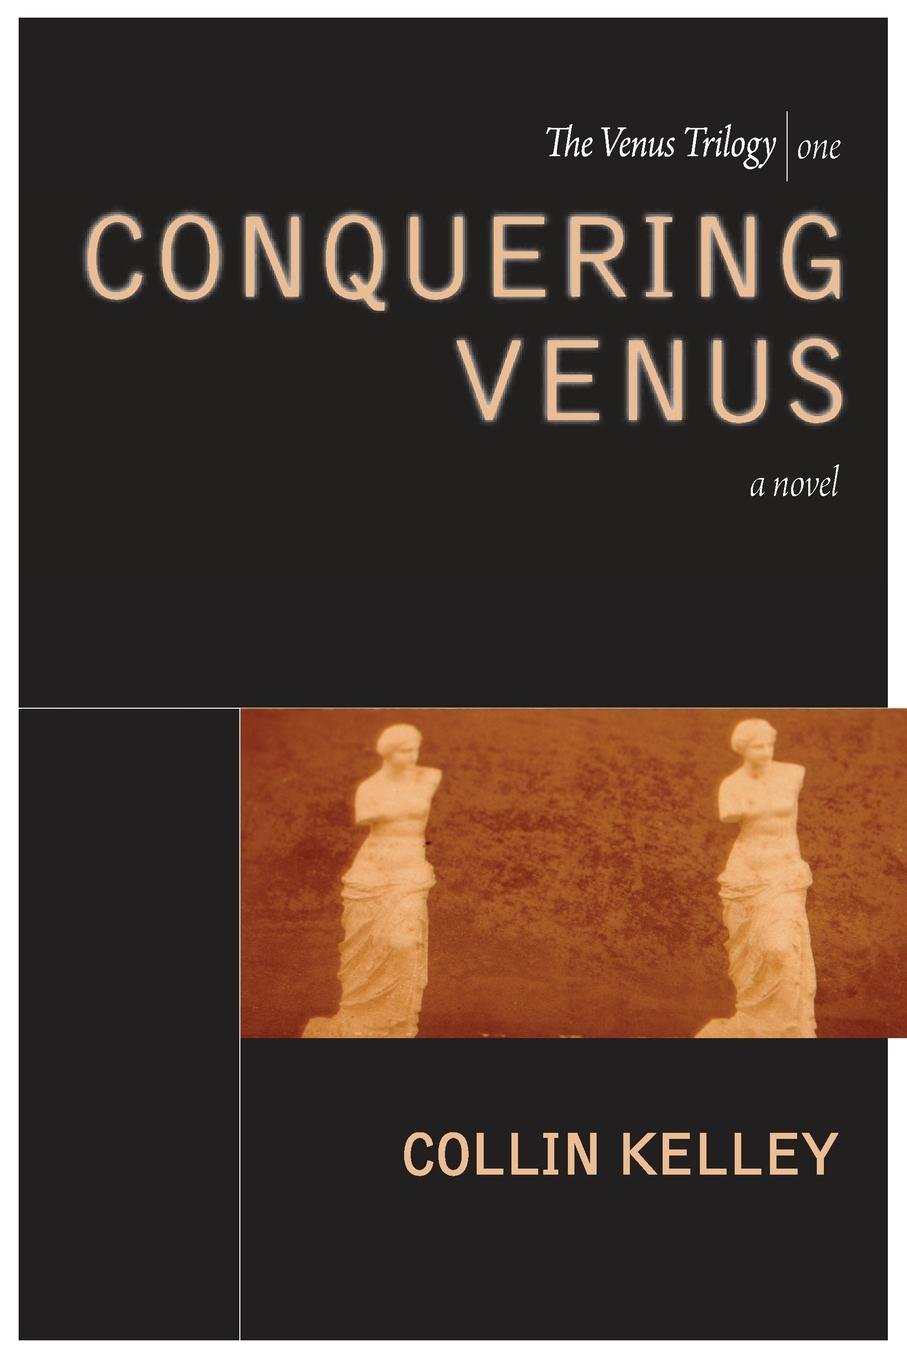 Image of Conquering Venus: The Venus Trilogy Book One by Collin Kelley (Paperback)